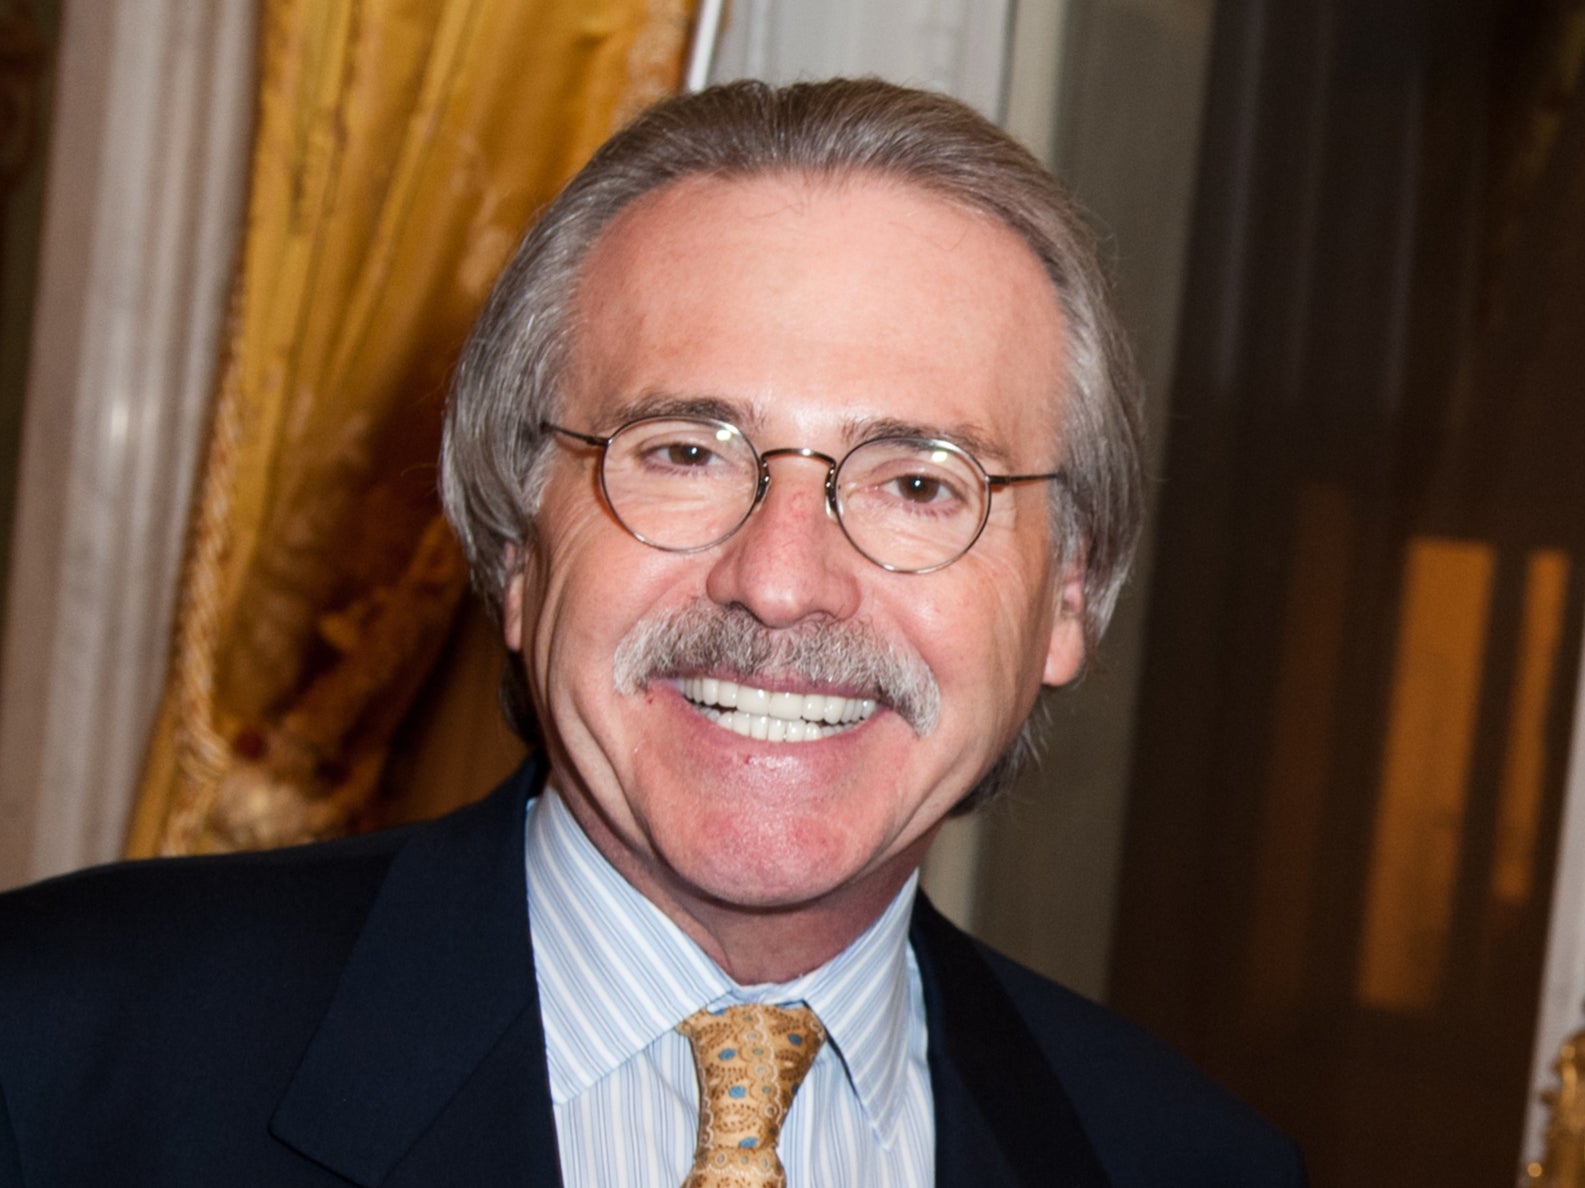 David Pecker and Daniel E. Harris attend the 'Shape France' Magazine cocktail launch at Hotel Talleyrand on January 19, 2012 in Paris, France